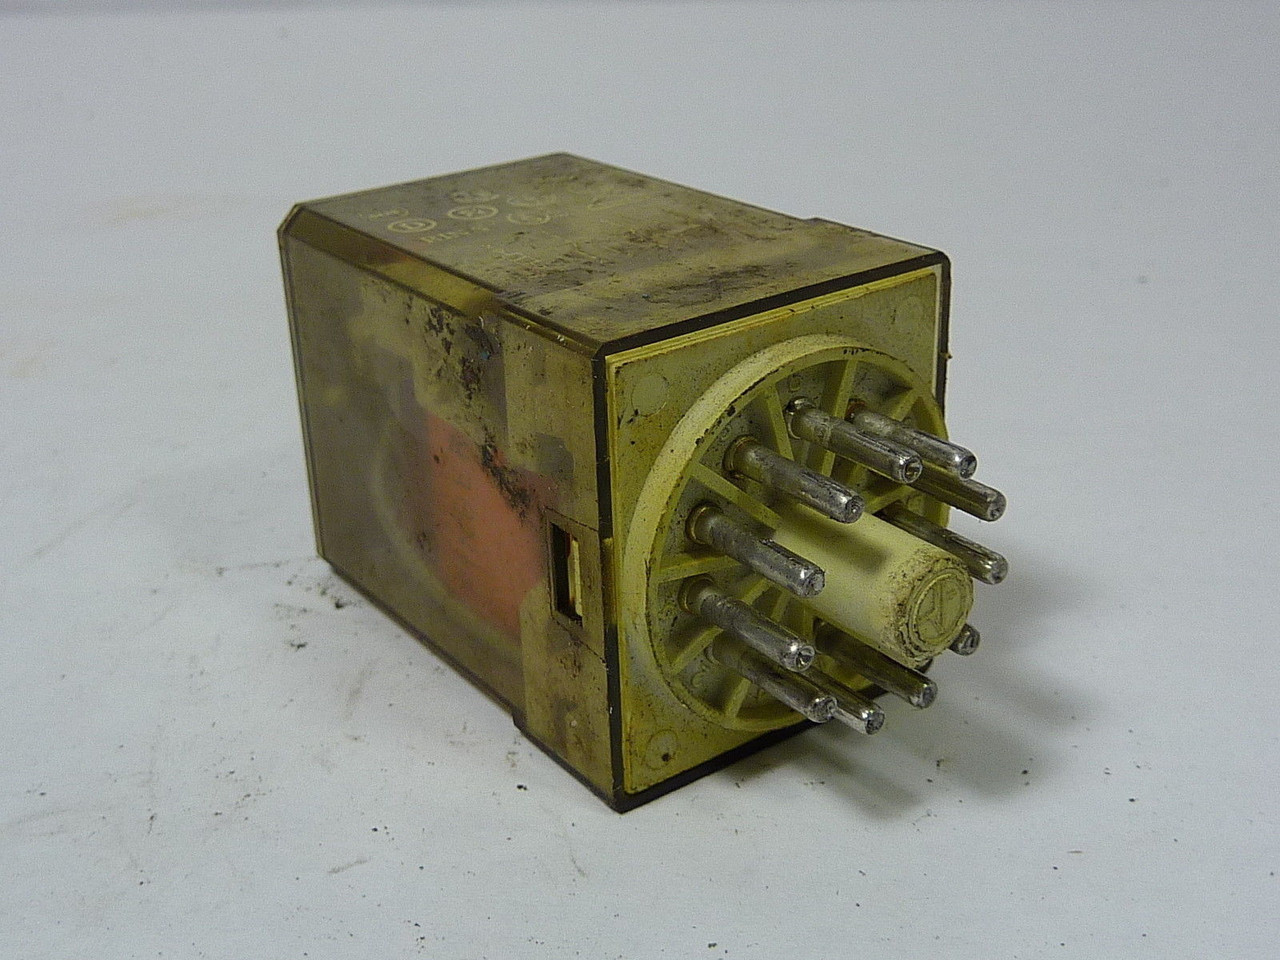 Finder 60.13.8.110.0020 General Purpose Relay 250V 10A Coil 110VAC USED